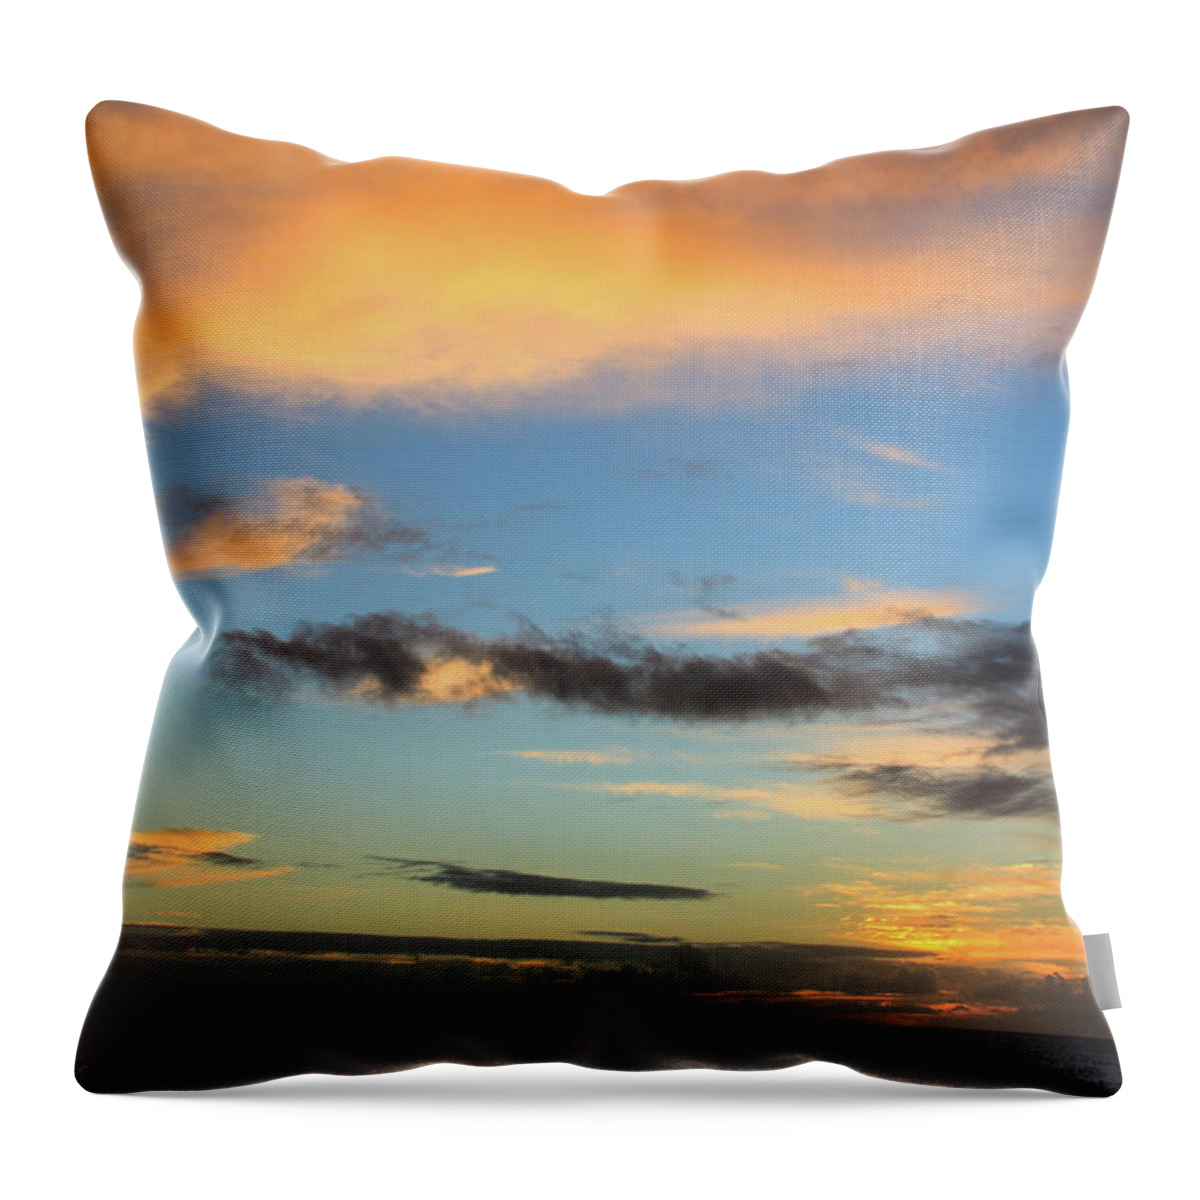 Hawaii Throw Pillow featuring the photograph Sunset Rendezvous by Briand Sanderson